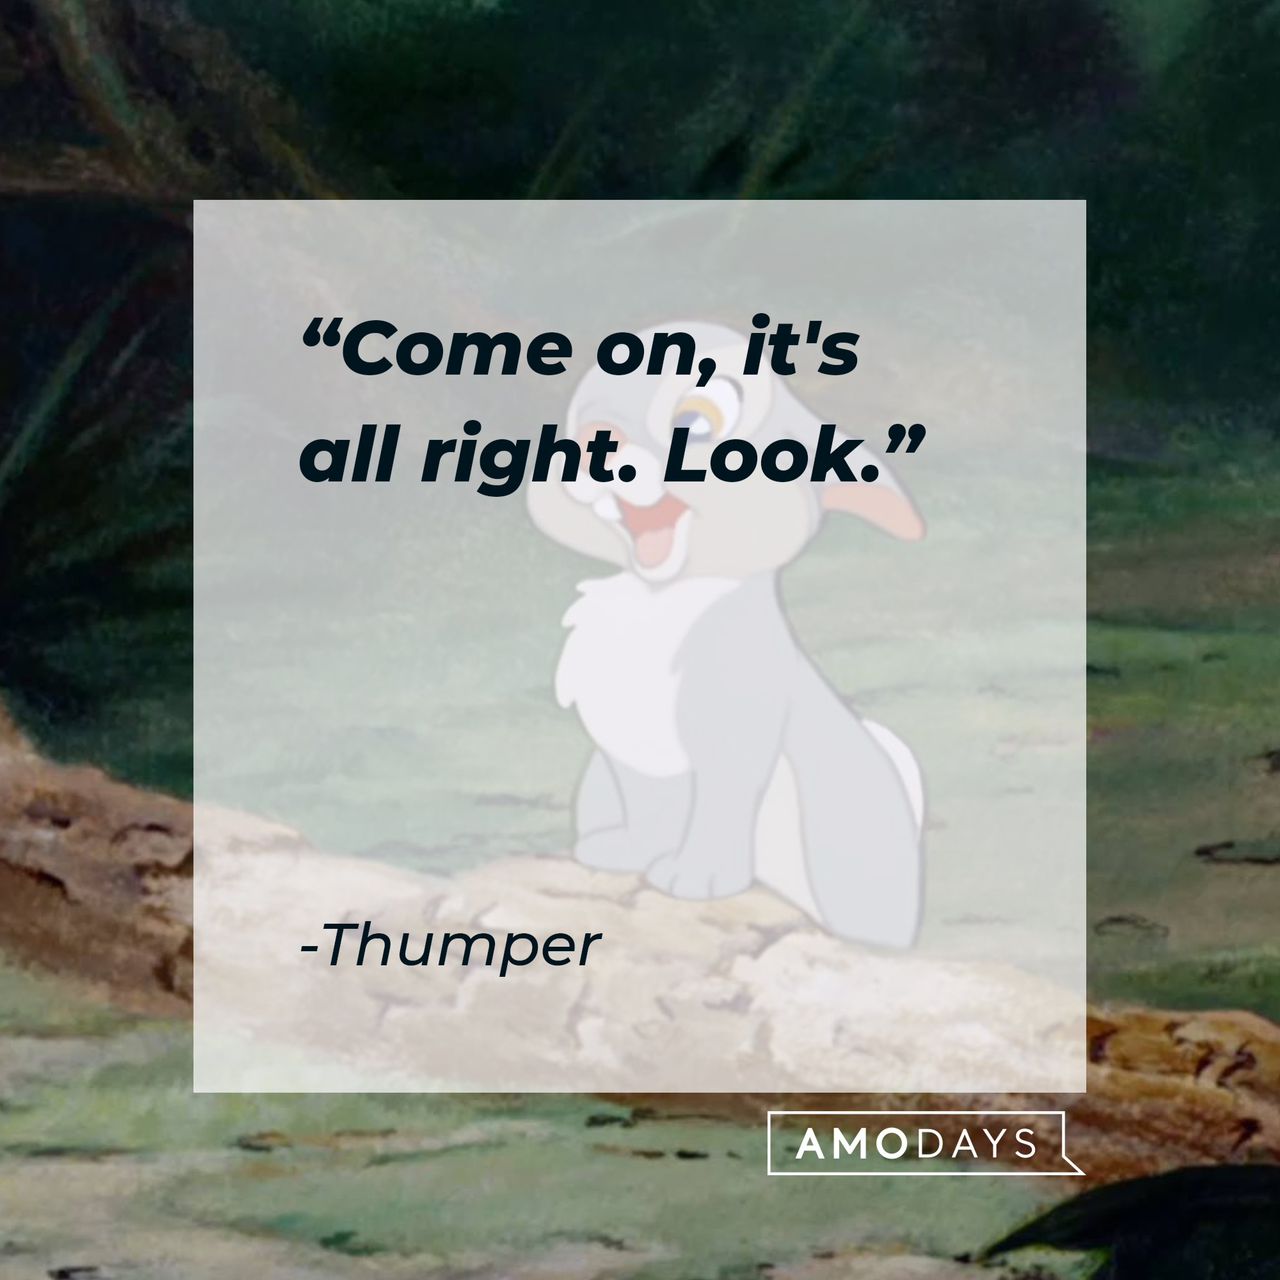 Thumper's quote "Come on, it's all right. Look." | Source: facebook.com/DisneyBambi